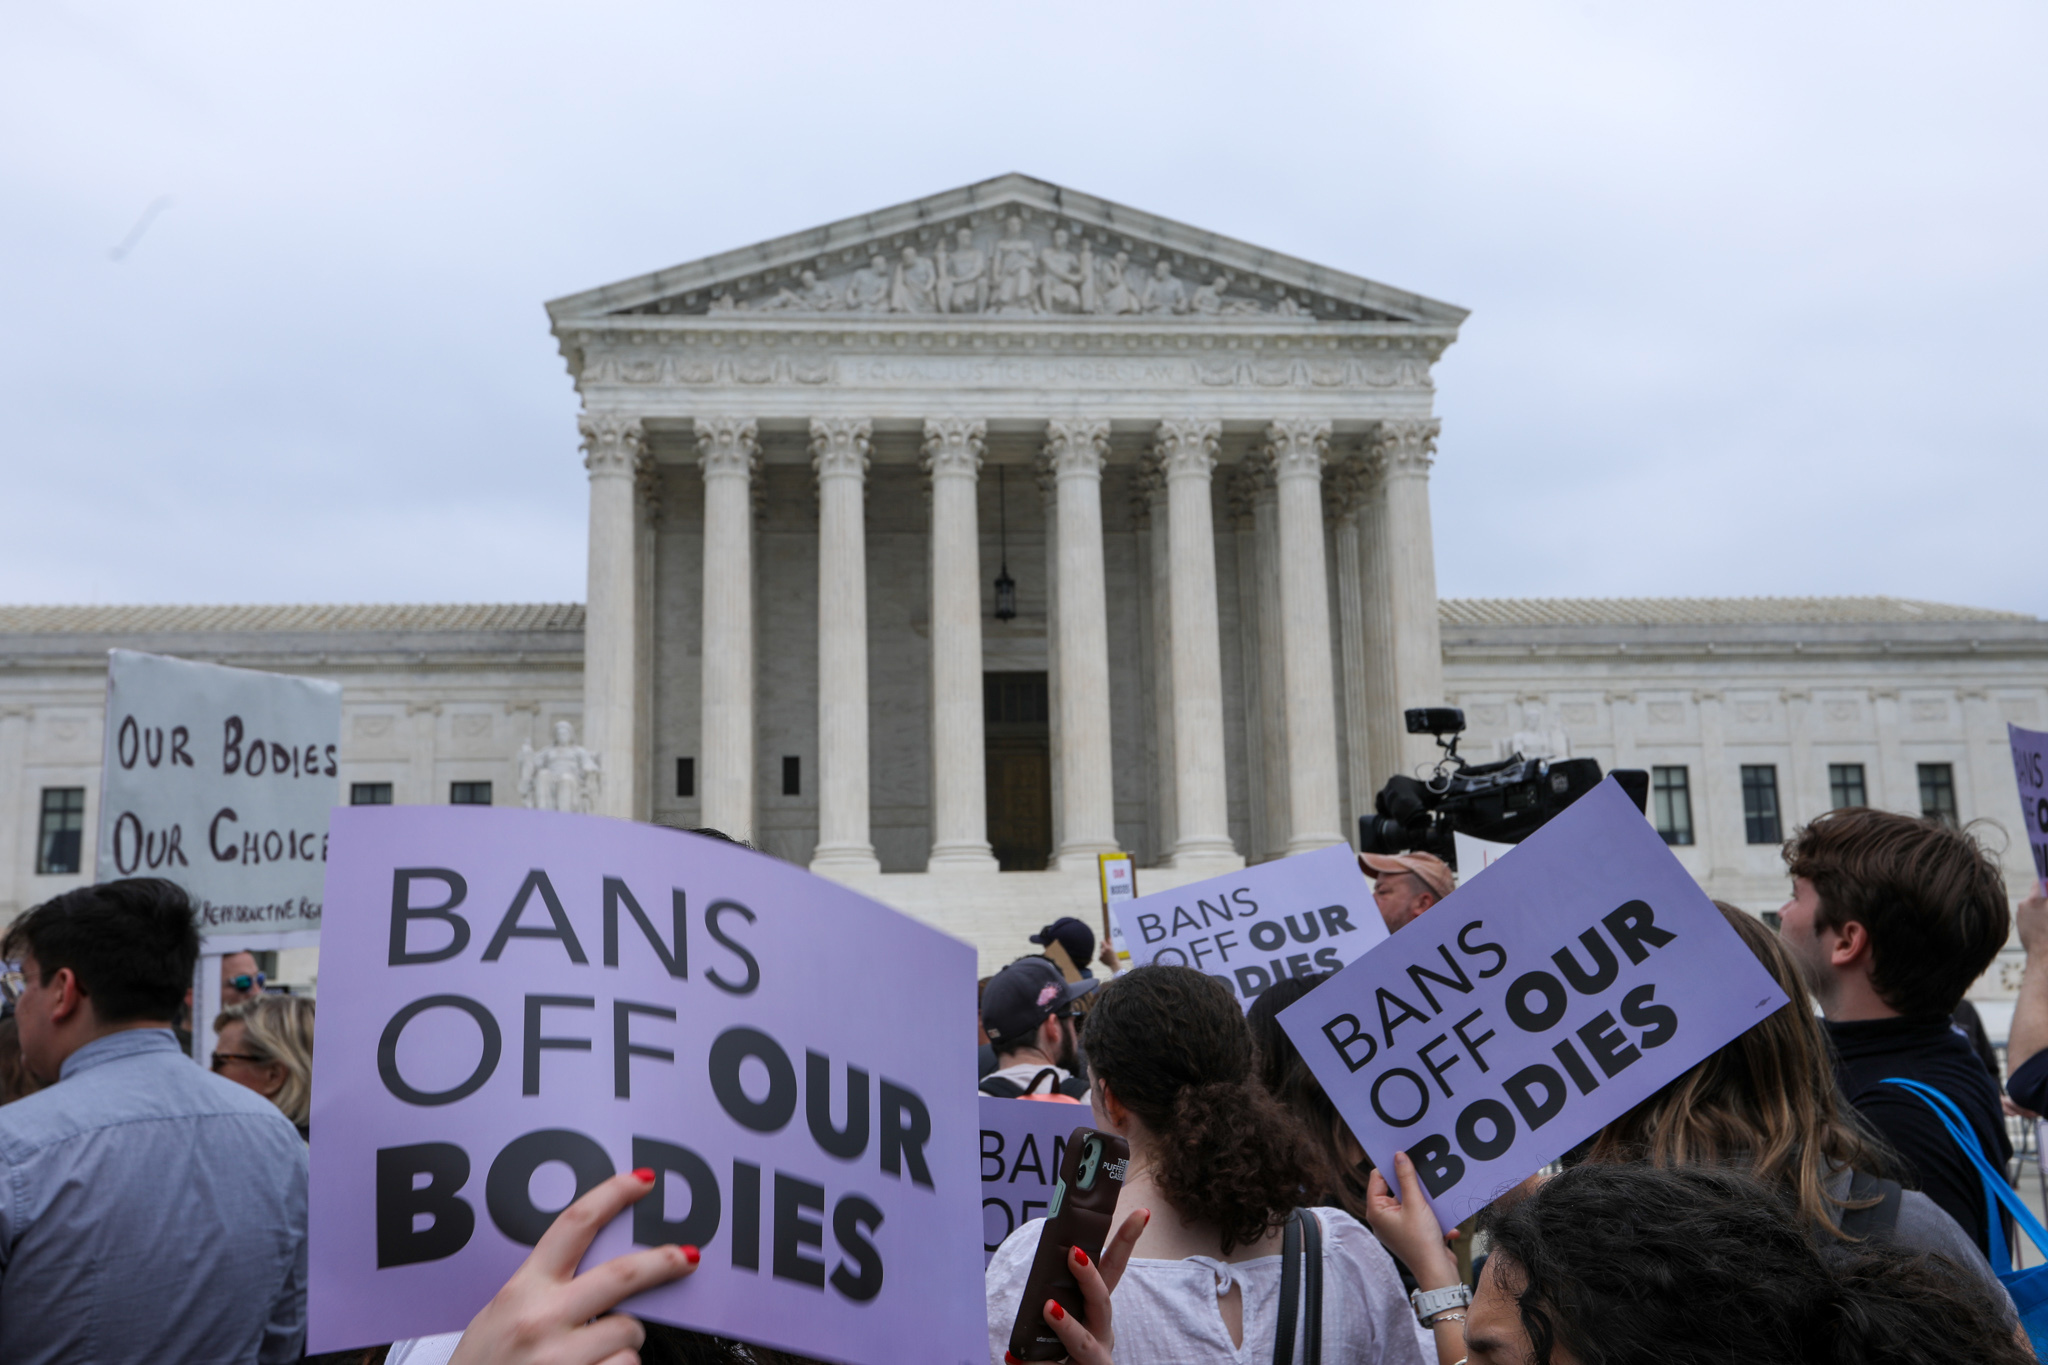 PHOTO: Activists rally outside the U.S. Supreme Court in Washington, D.C., on May 3, 2022, after the leak of a draft majority opinion preparing for the court to overturn the landmark abortion decision in Roe v. Wade.